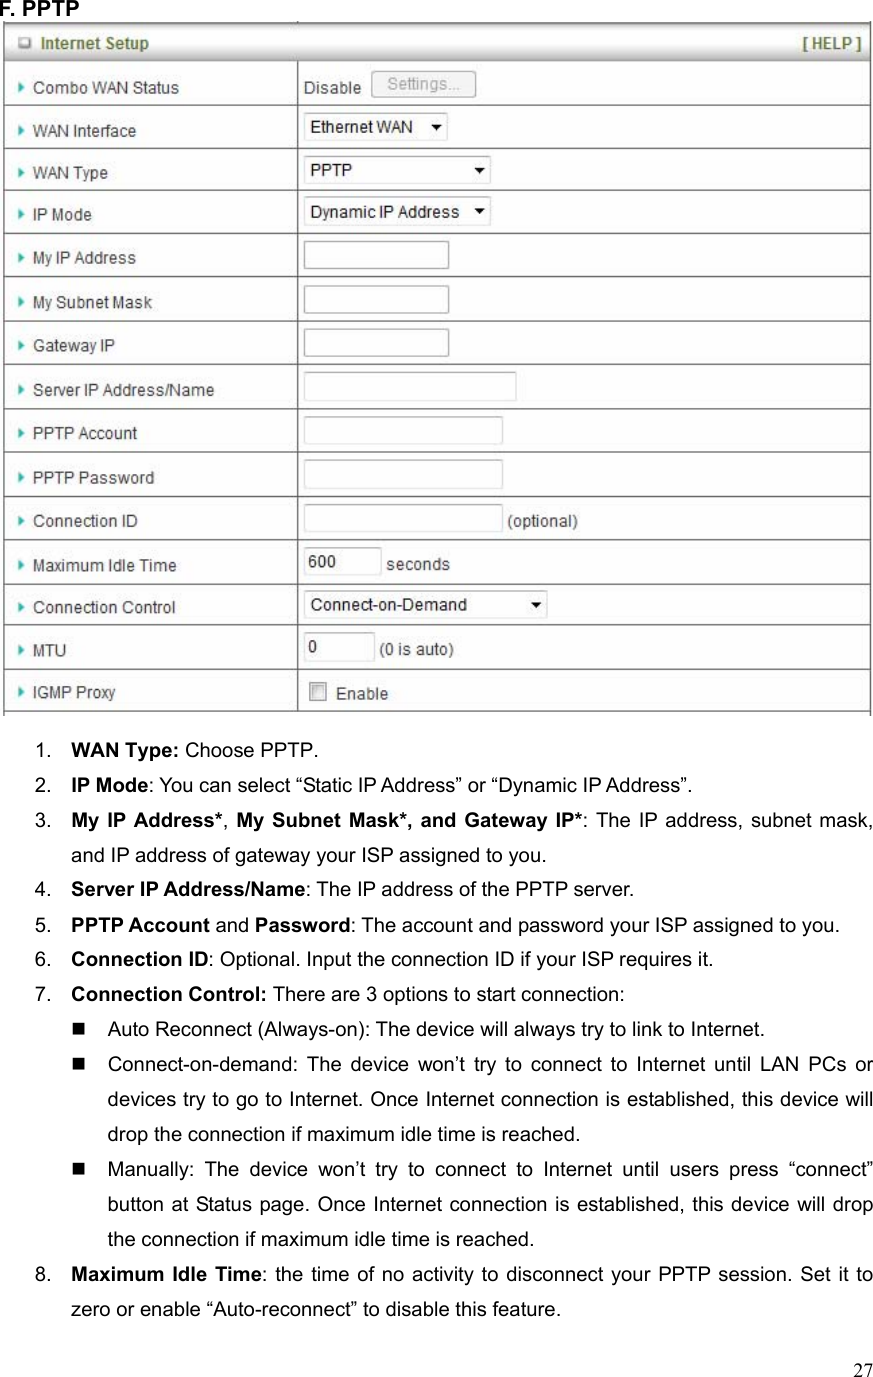  27F. PPTP     1.  WAN Type: Choose PPTP. 2.  IP Mode: You can select “Static IP Address” or “Dynamic IP Address”.   3.  My IP Address*, My Subnet Mask*, and Gateway IP*: The IP address, subnet mask, and IP address of gateway your ISP assigned to you.   4.  Server IP Address/Name: The IP address of the PPTP server. 5.  PPTP Account and Password: The account and password your ISP assigned to you. 6.  Connection ID: Optional. Input the connection ID if your ISP requires it.   7.  Connection Control: There are 3 options to start connection:     Auto Reconnect (Always-on): The device will always try to link to Internet.       Connect-on-demand: The device won’t try to connect to Internet until LAN PCs or devices try to go to Internet. Once Internet connection is established, this device will drop the connection if maximum idle time is reached.   Manually: The device won’t try to connect to Internet until users press “connect” button at Status page. Once Internet connection is established, this device will drop the connection if maximum idle time is reached. 8.  Maximum Idle Time: the time of no activity to disconnect your PPTP session. Set it to zero or enable “Auto-reconnect” to disable this feature. 